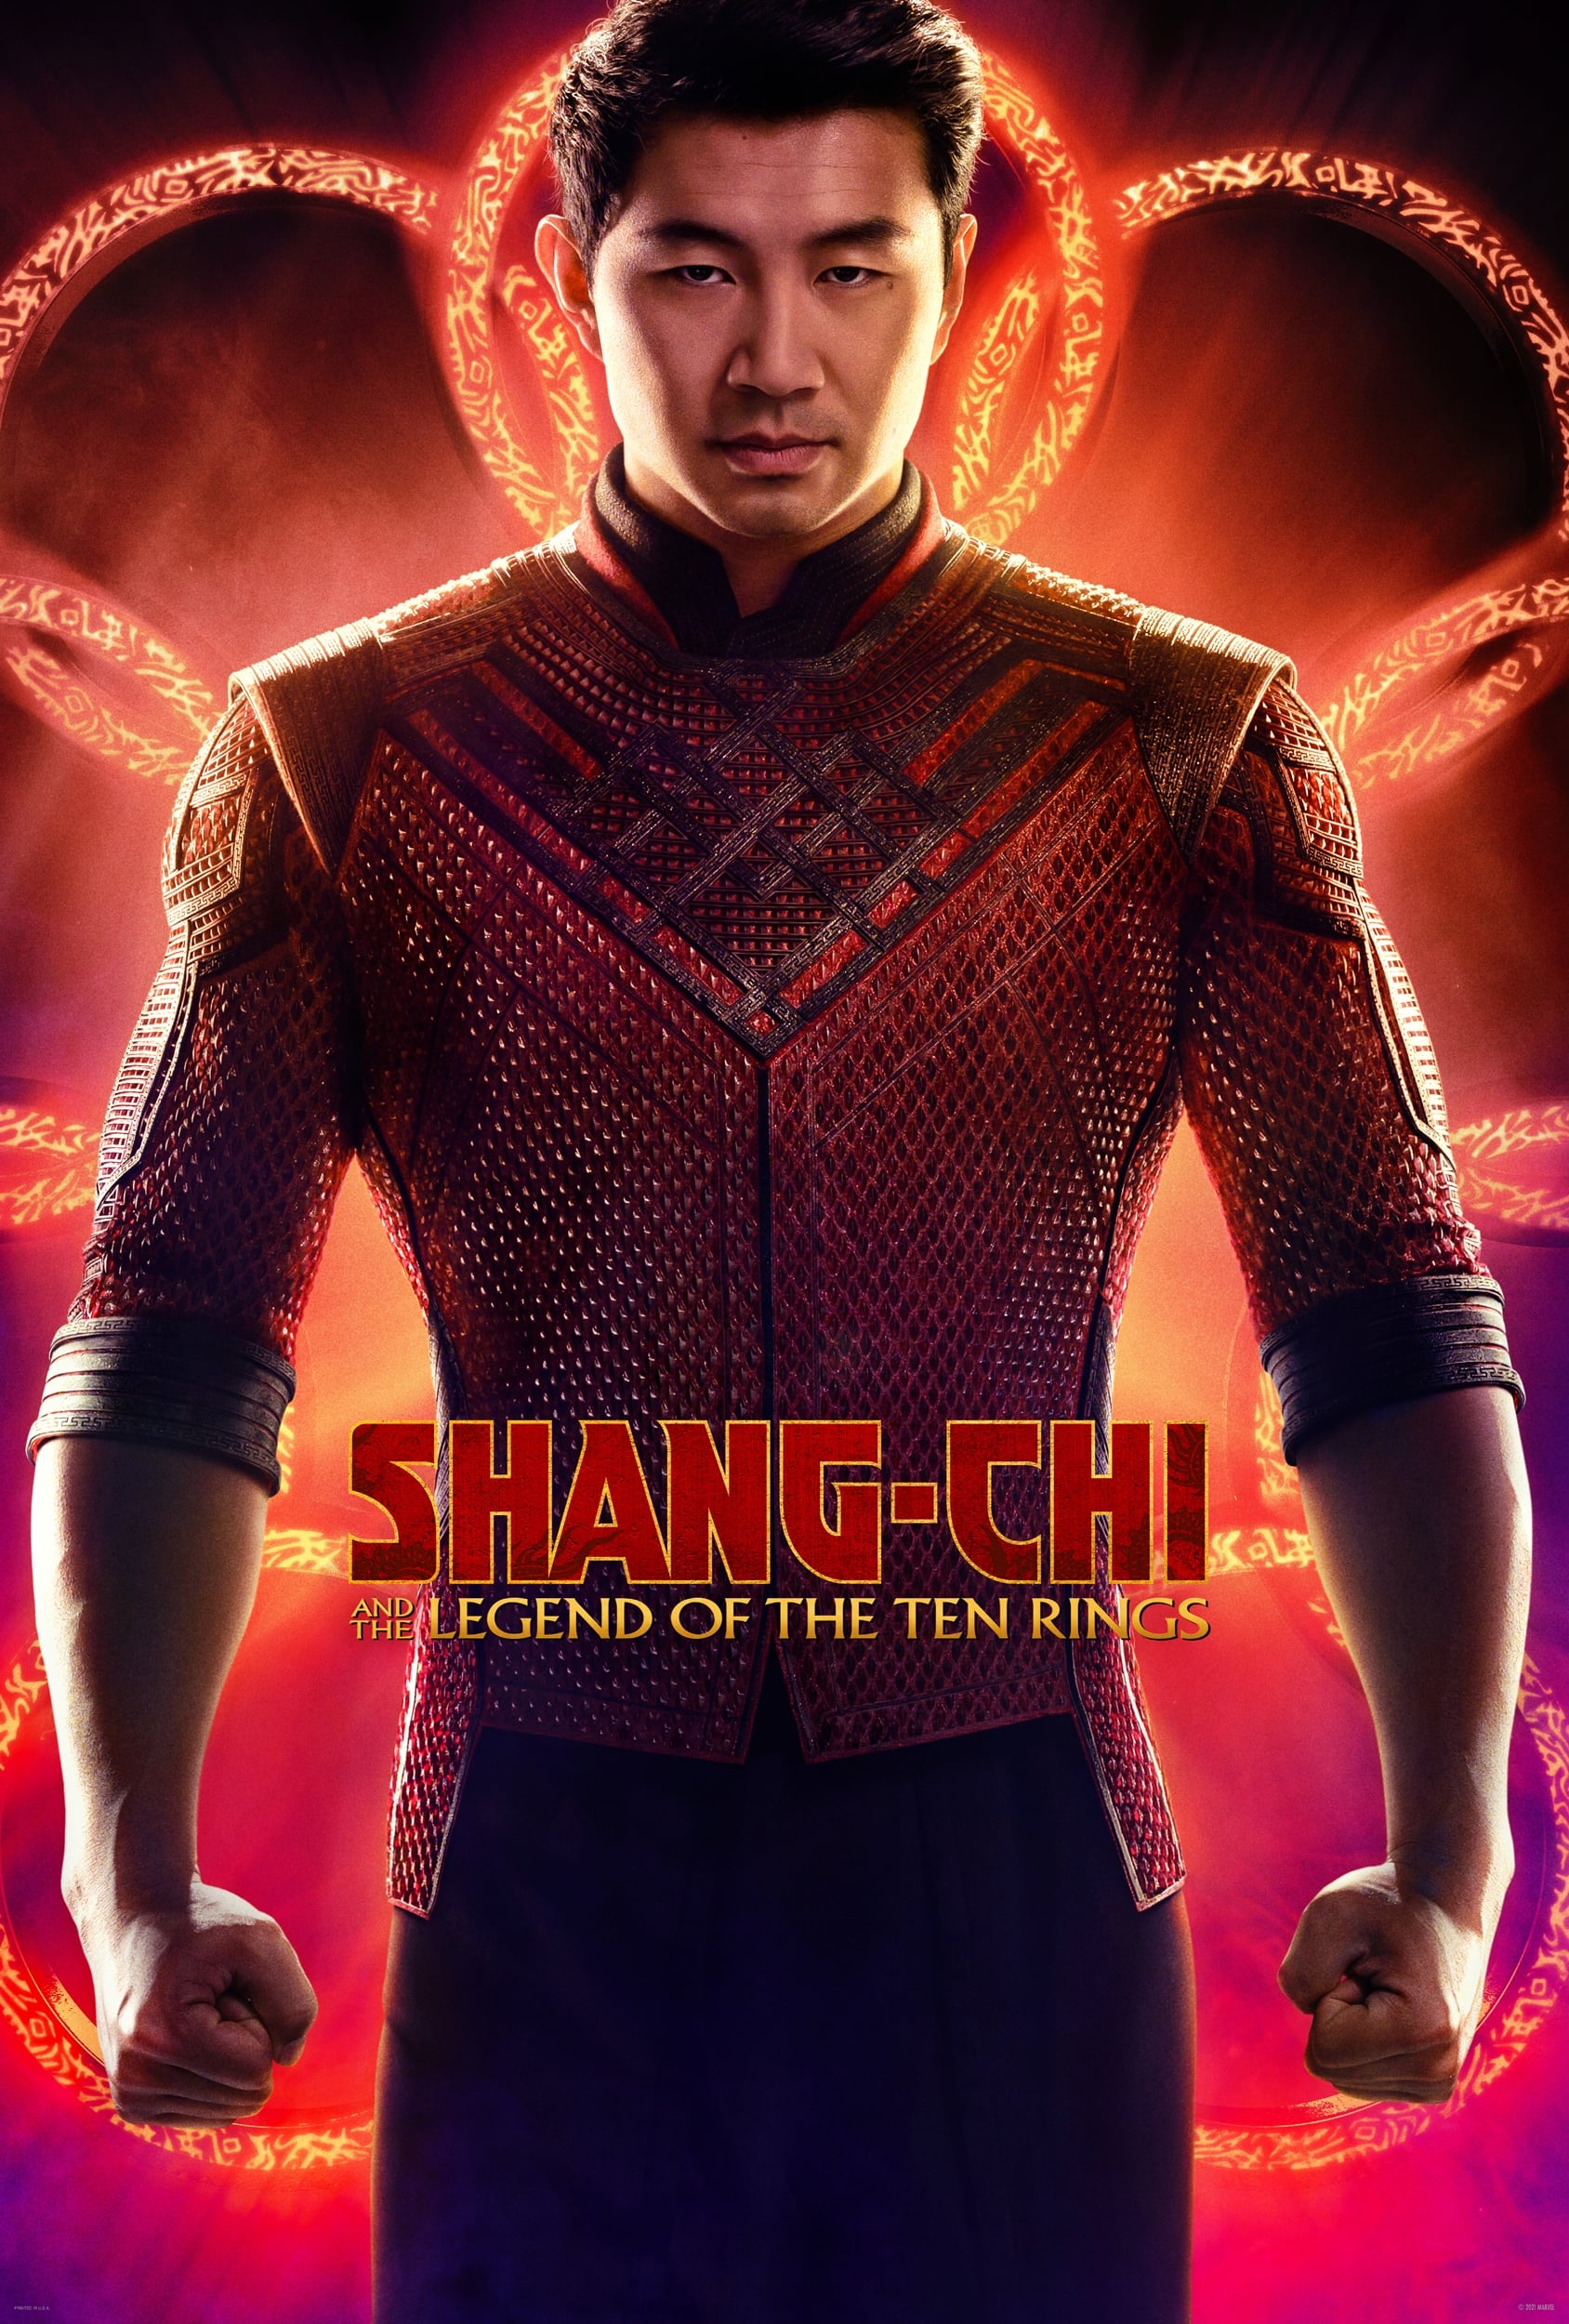 Shang-Chi and the Legend of the Ten Rings (2021) 480p BluRay Hindi Dual Audio Movie ESubs [550MB]